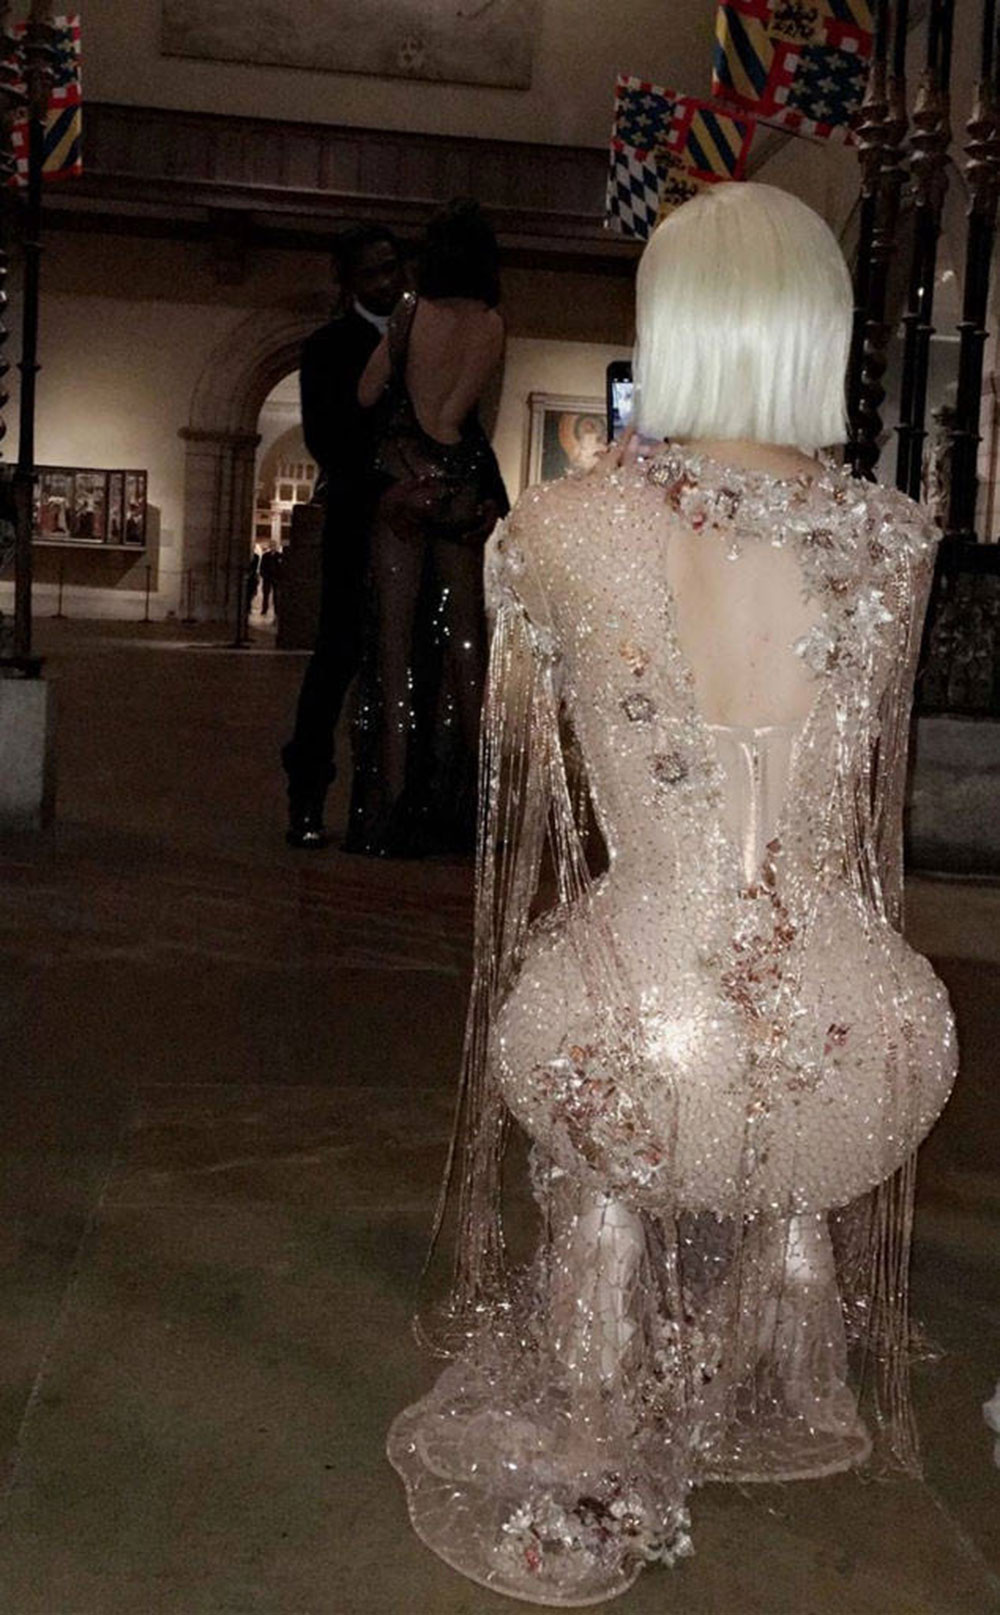 ...Then managed to take this sneaky snap of Kylie Jenner taking a picture of sister Kendall, posing with her not-so-secret boyfriend, A$AP Rocky.